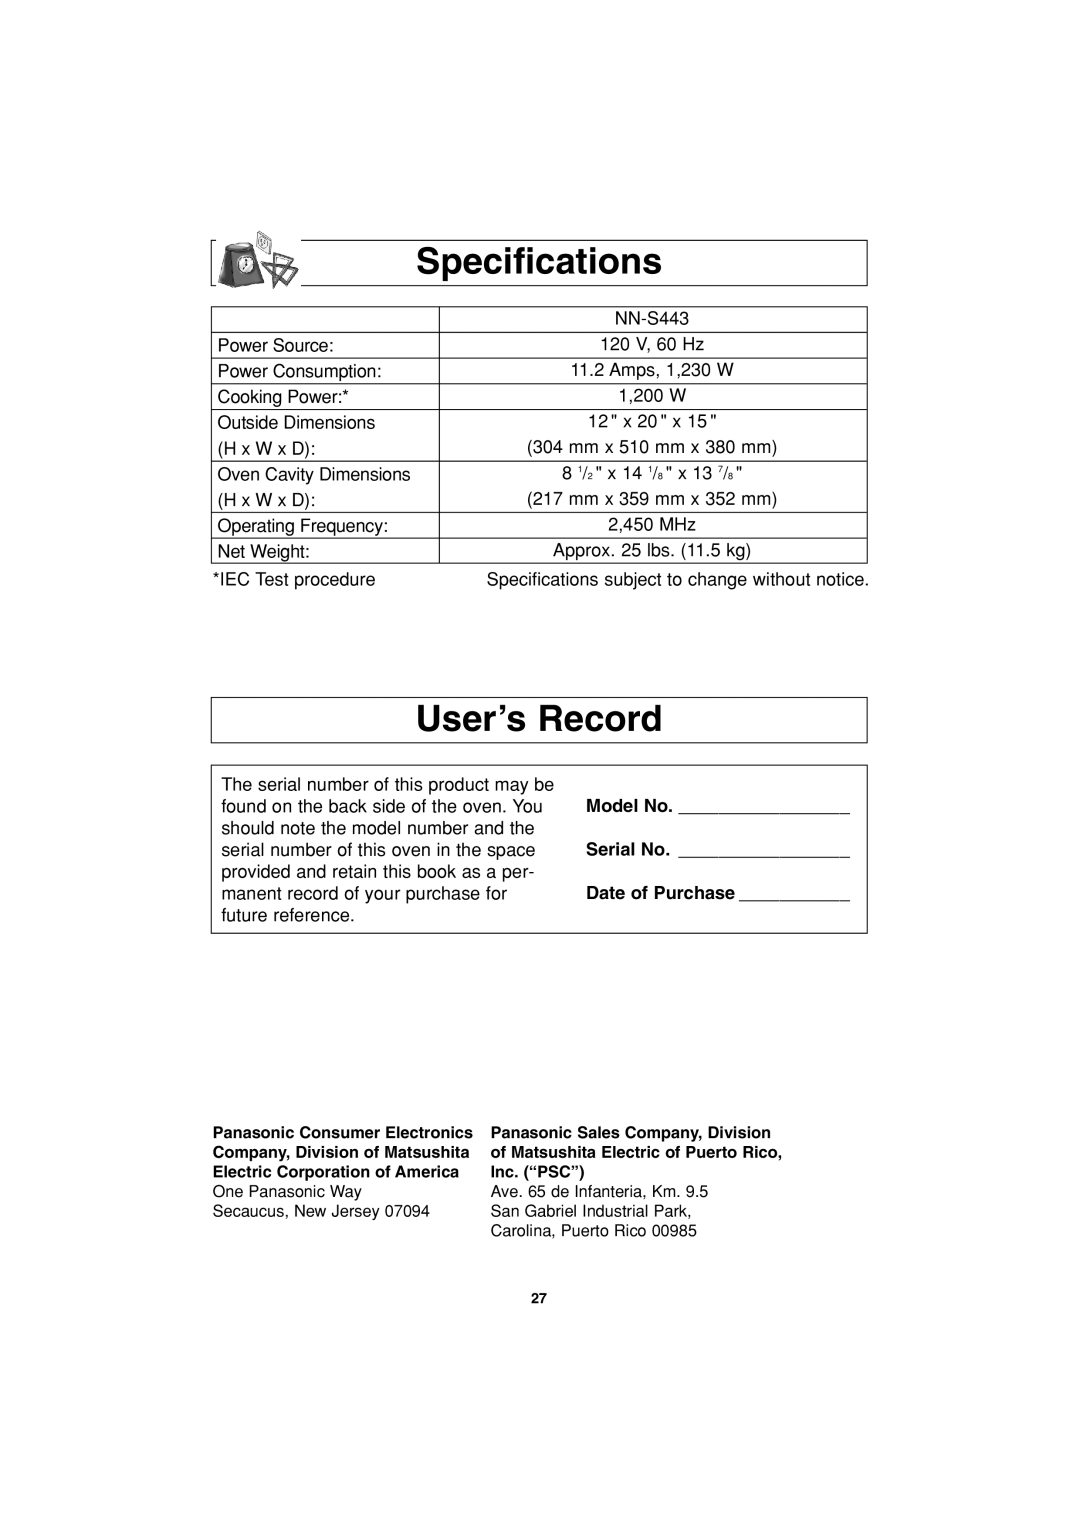 Panasonic NN-S443 important safety instructions Specifications, User’s Record, Model No, Serial No, Date of Purchase 